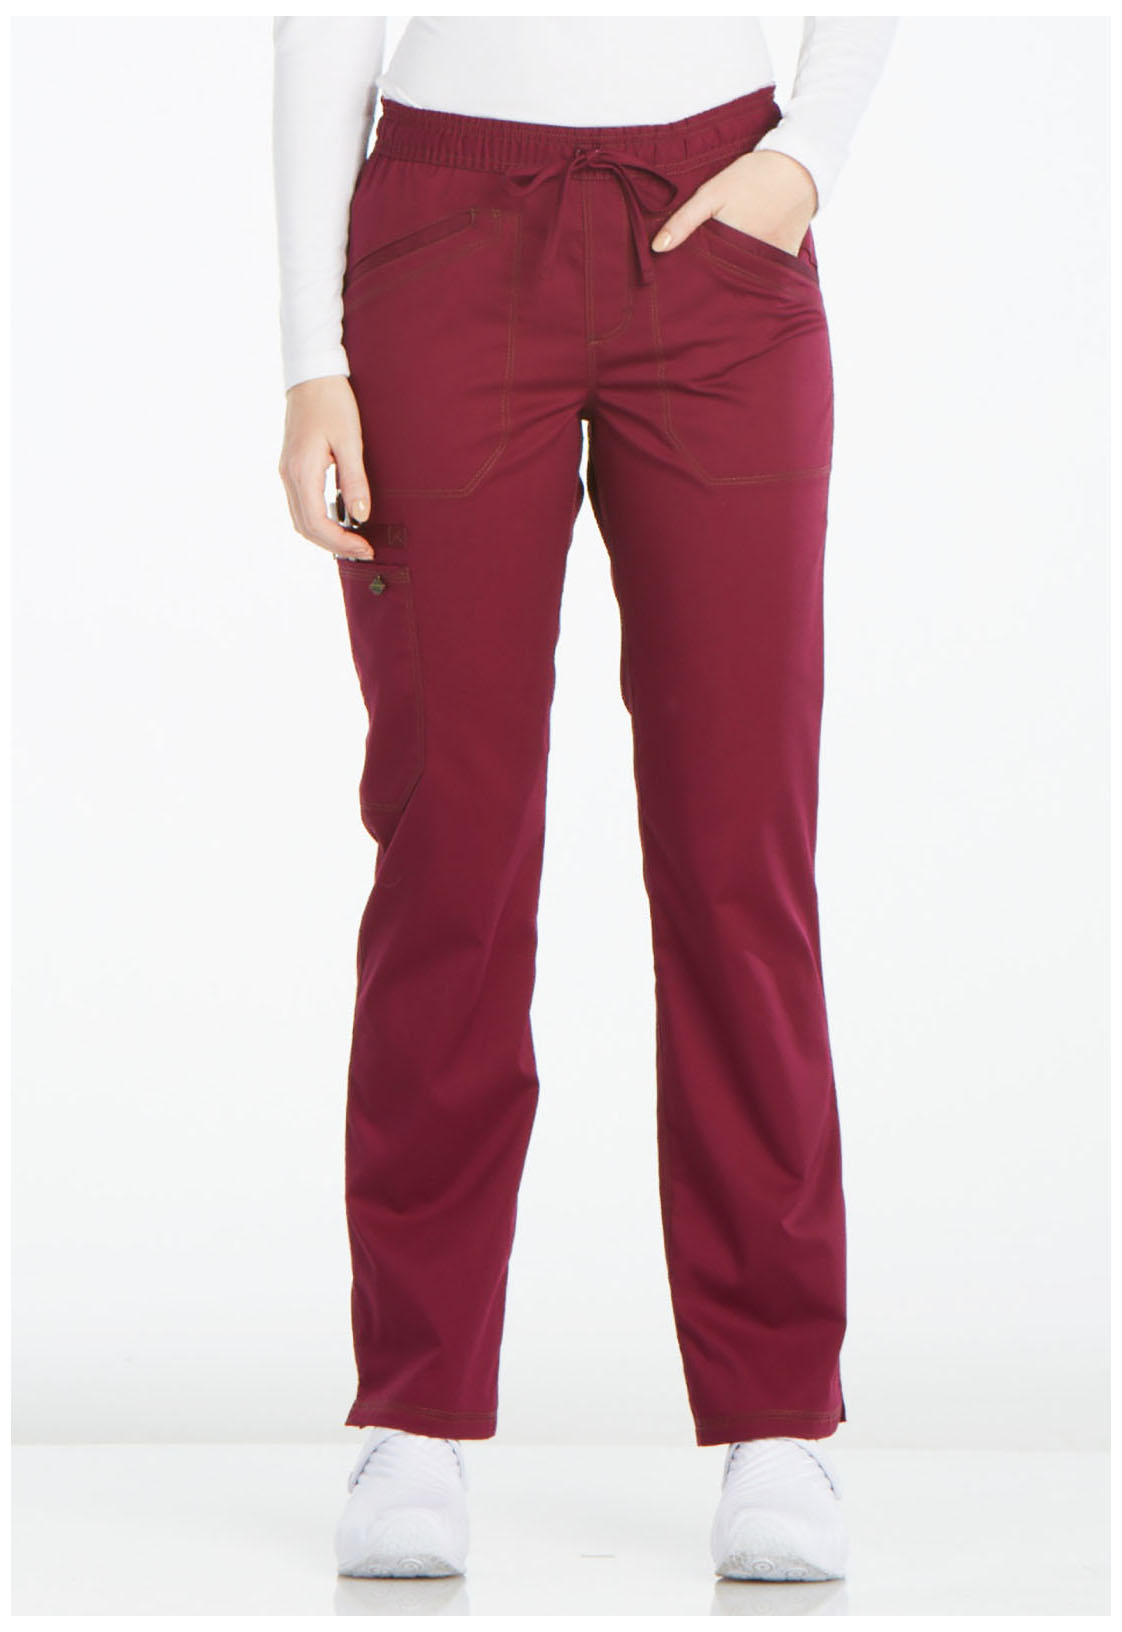 Dickies Essence Mid Rise Straight Leg Drawstring Pant in Wine from 